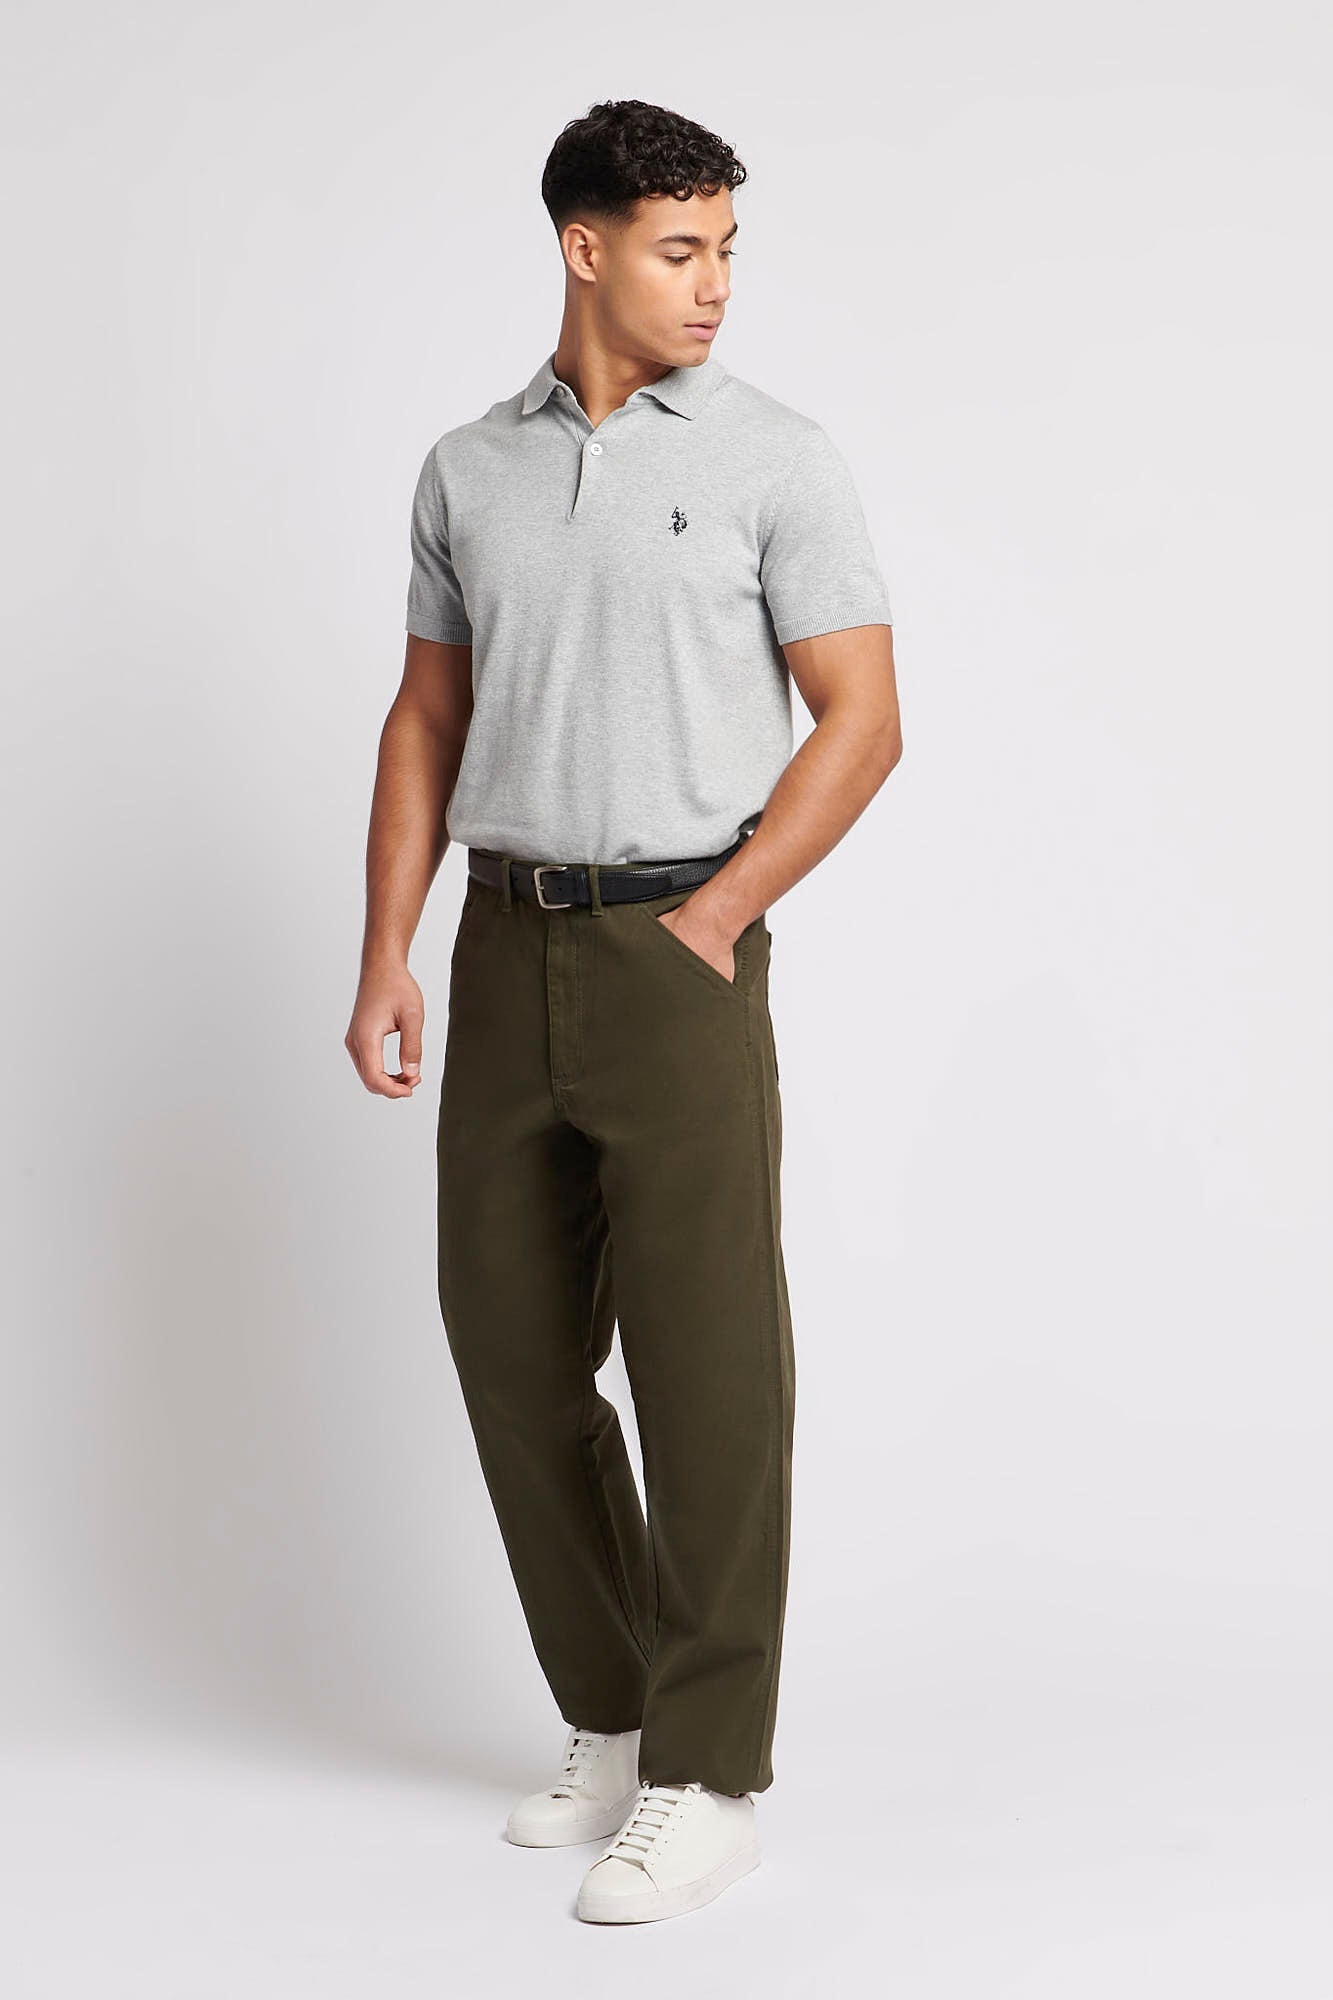 Mens Worker Trousers in Forest Night